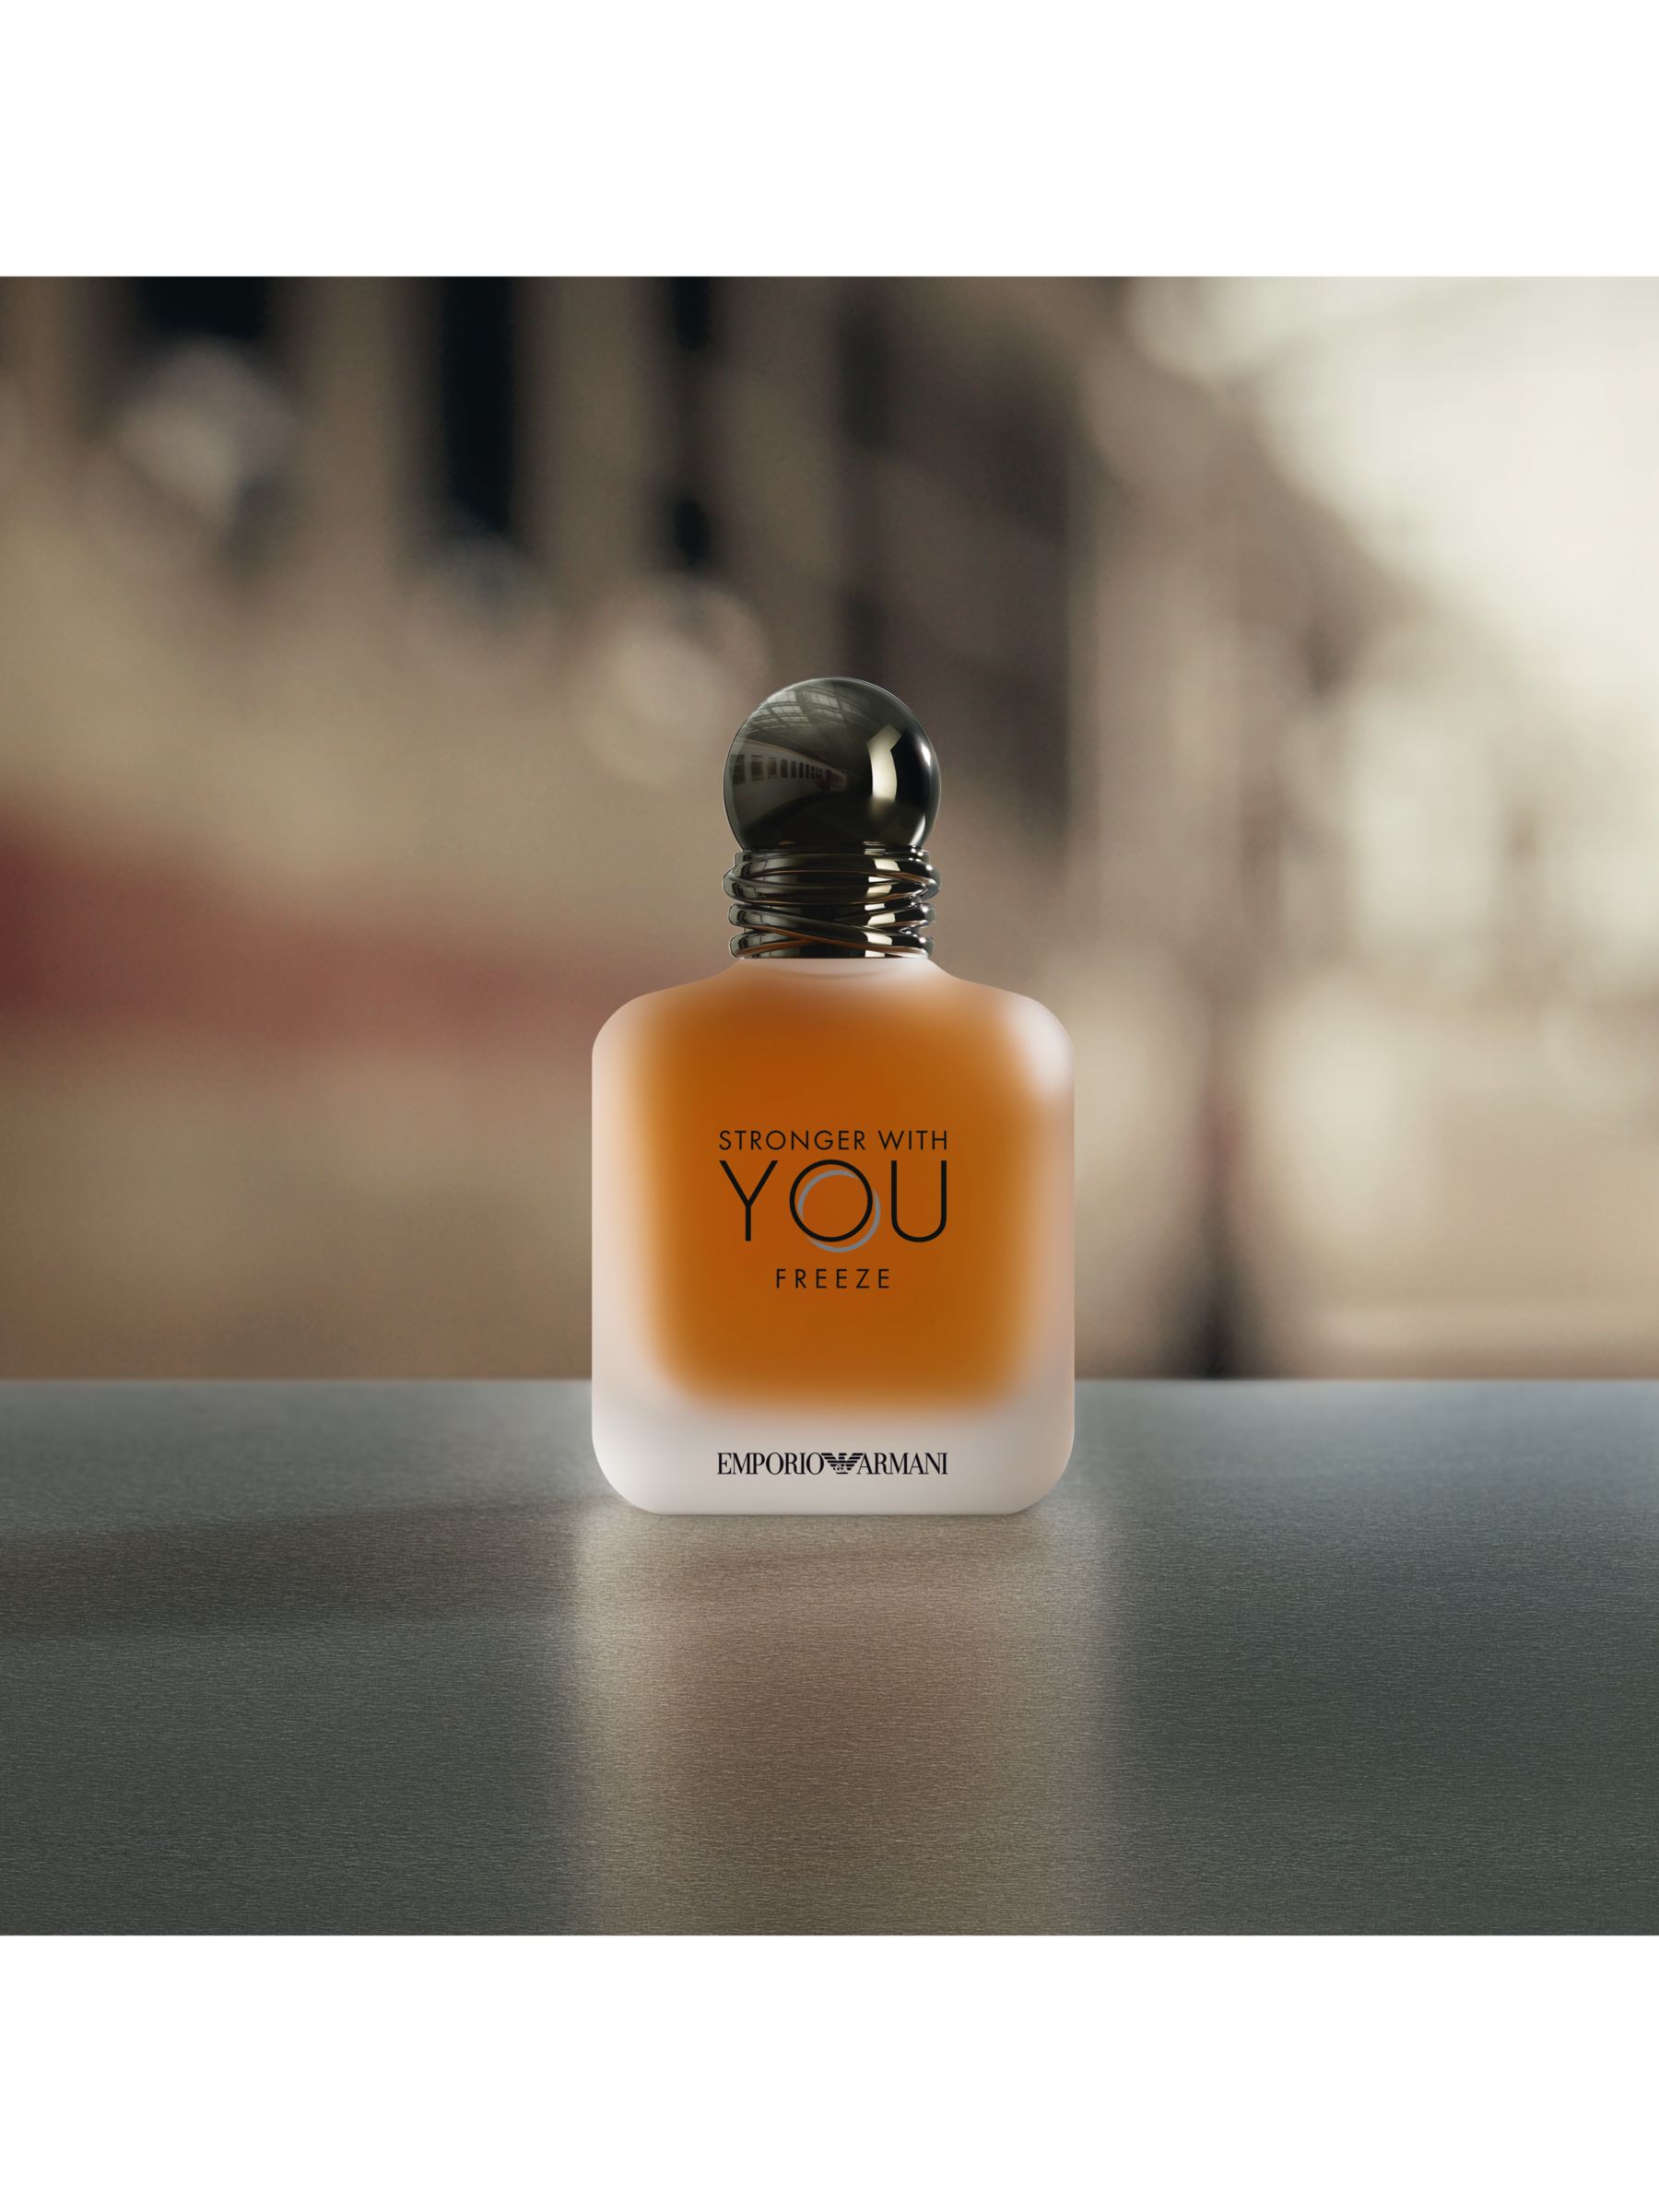 armani stronger with you notes